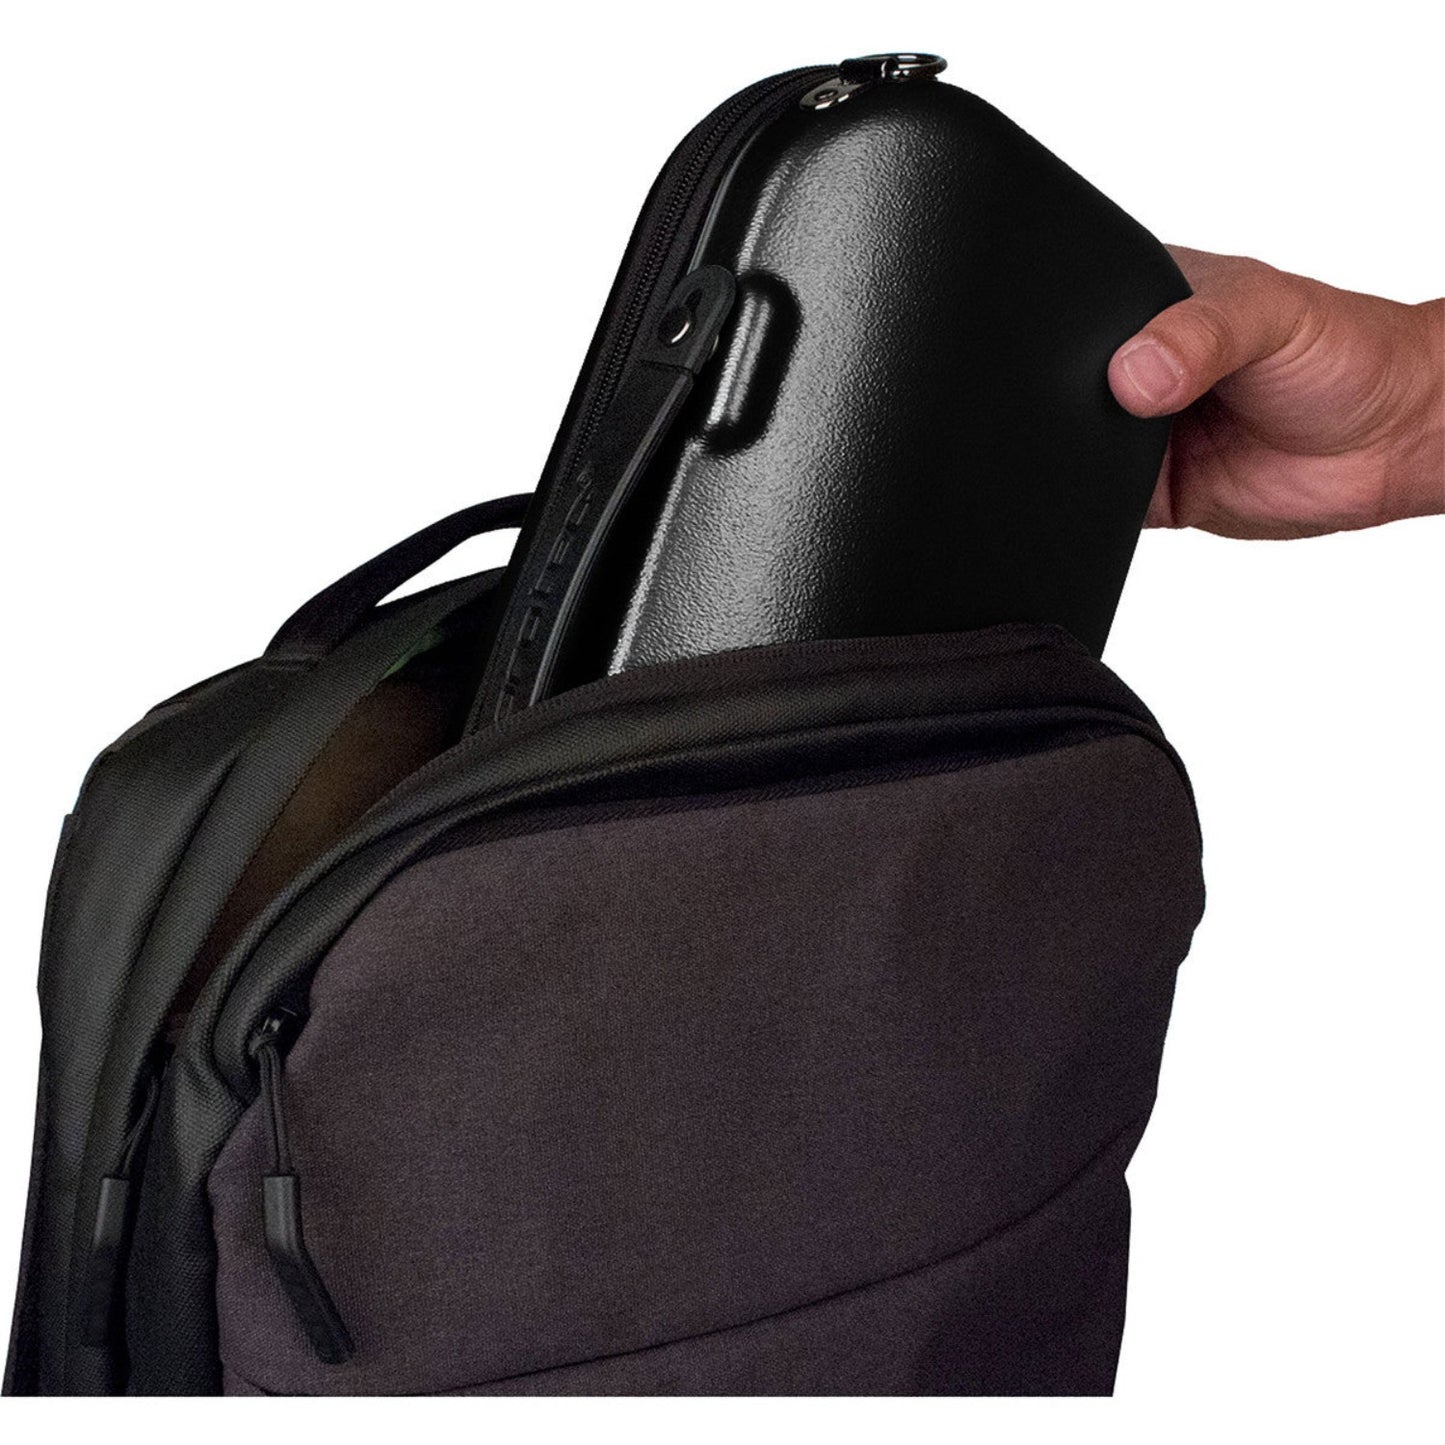 A hand removing the Protec Microzip clarinet case from a backpack, on a white background